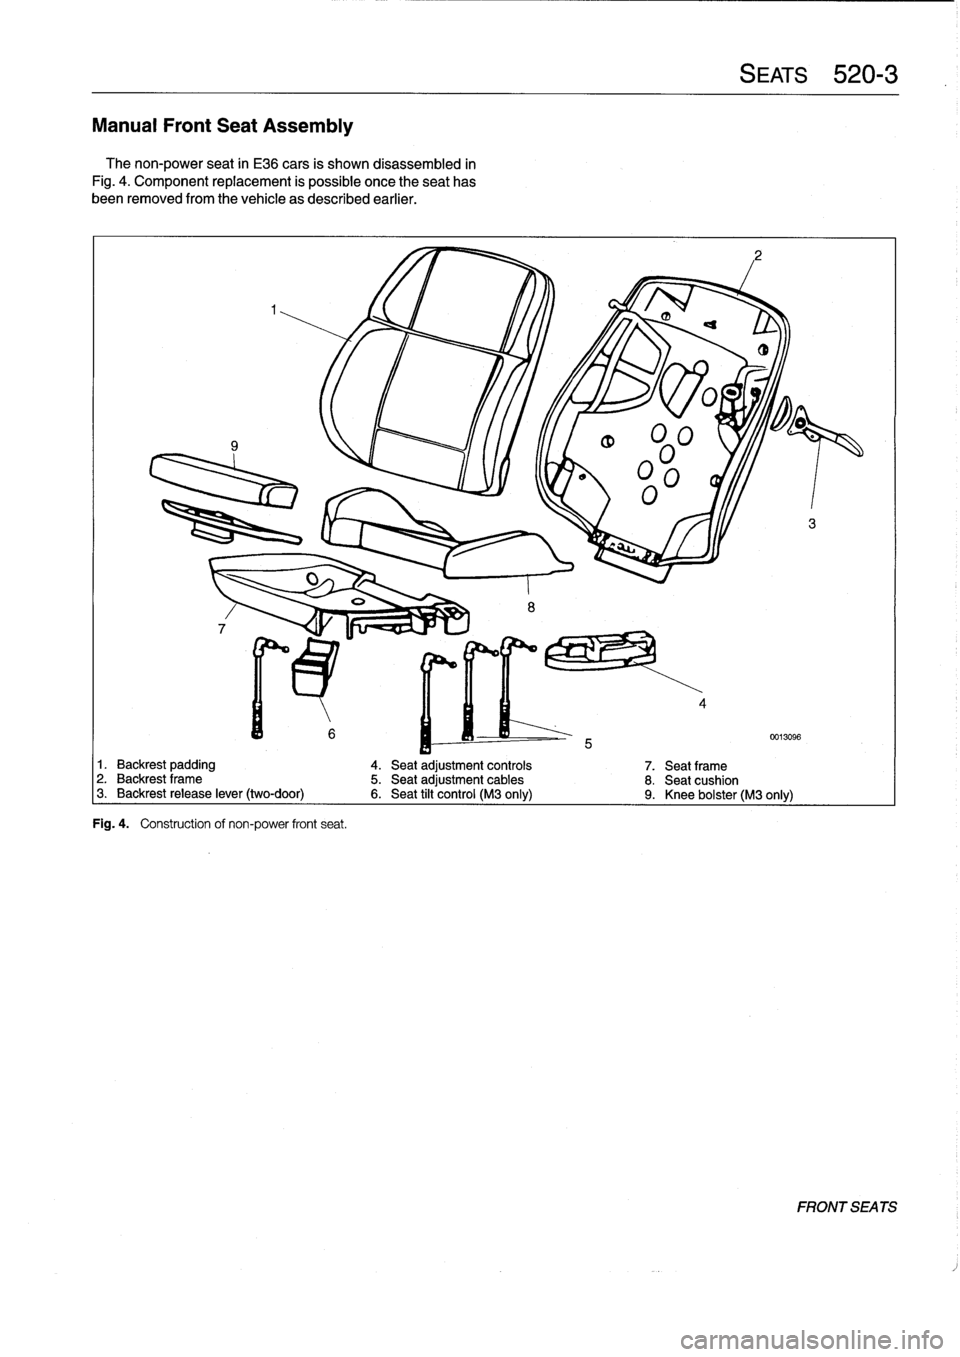 BMW 325i 1993 E36 Workshop Manual 
Manual
Front
Seat
Assembly

The
non-power
seat
in
E36
cars
is
shown
disassembled
in

Fig
.
4
.
Component
replacement
is
possible
once
theseat
has

been
removed
from
the
vehicle
as
described
earlier
.